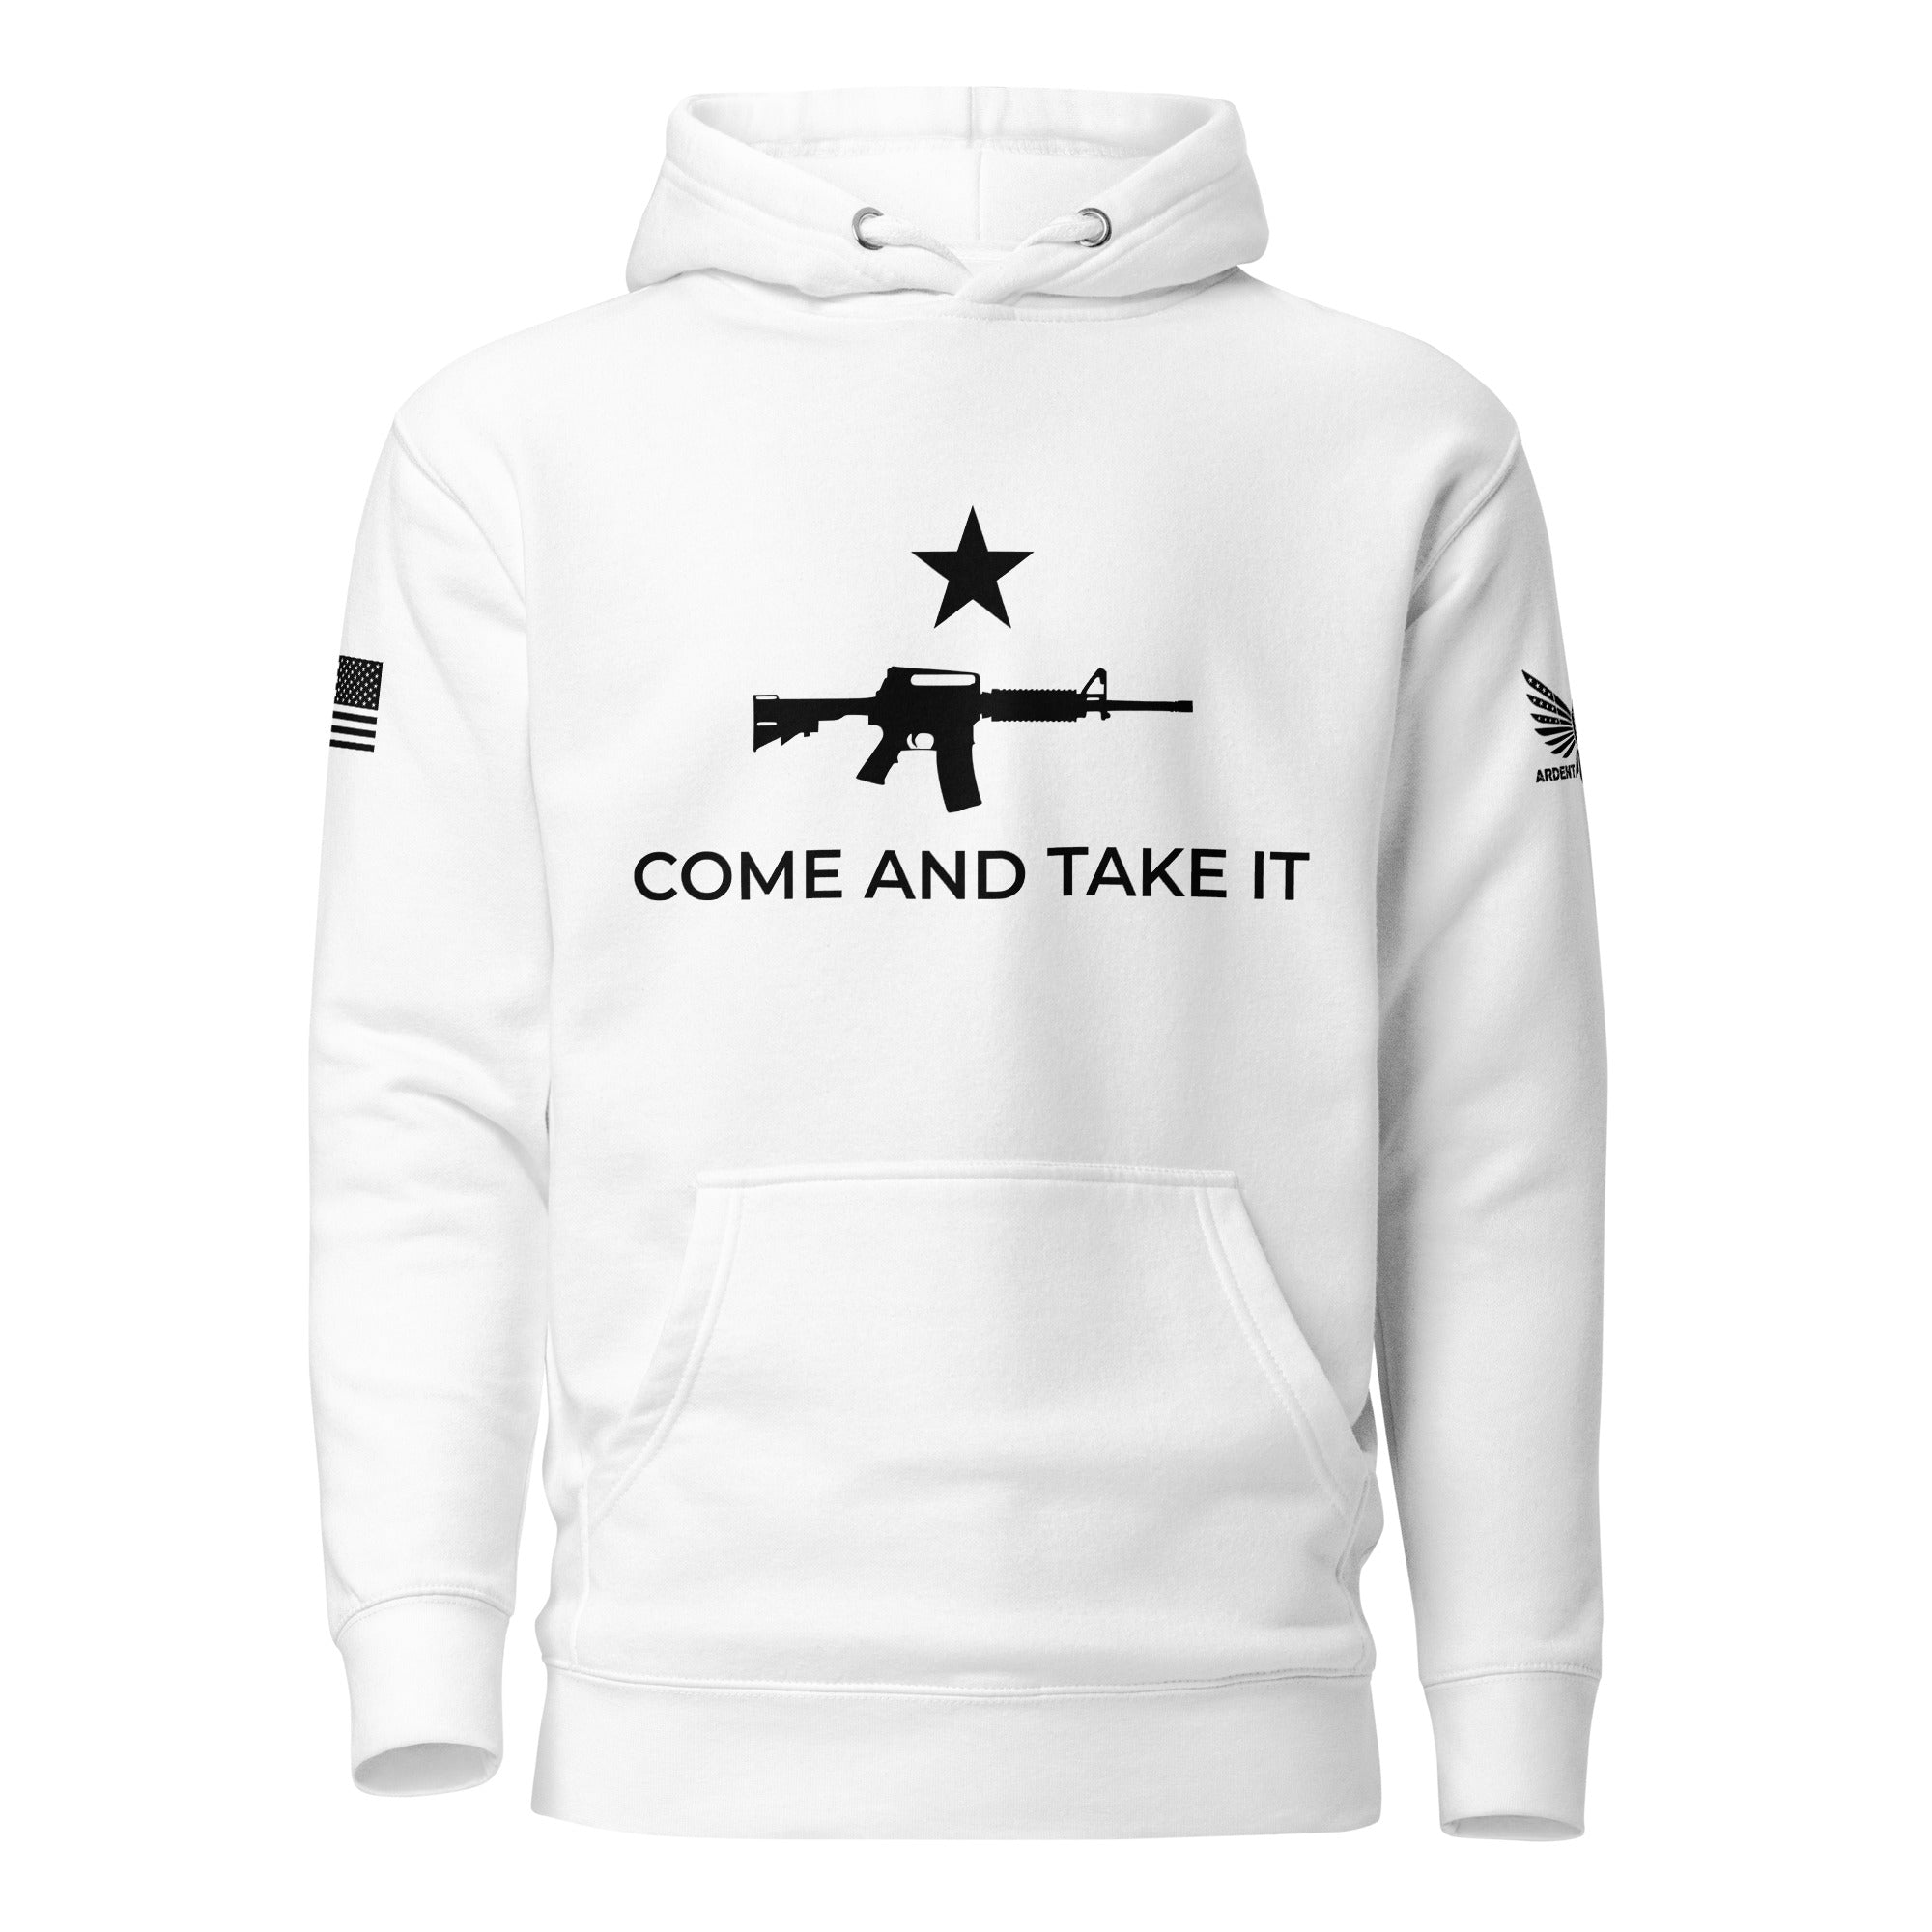 Come And Take It Hoodie-Premium Hoodie-Black-S-Ardent Patriot Apparel Co.